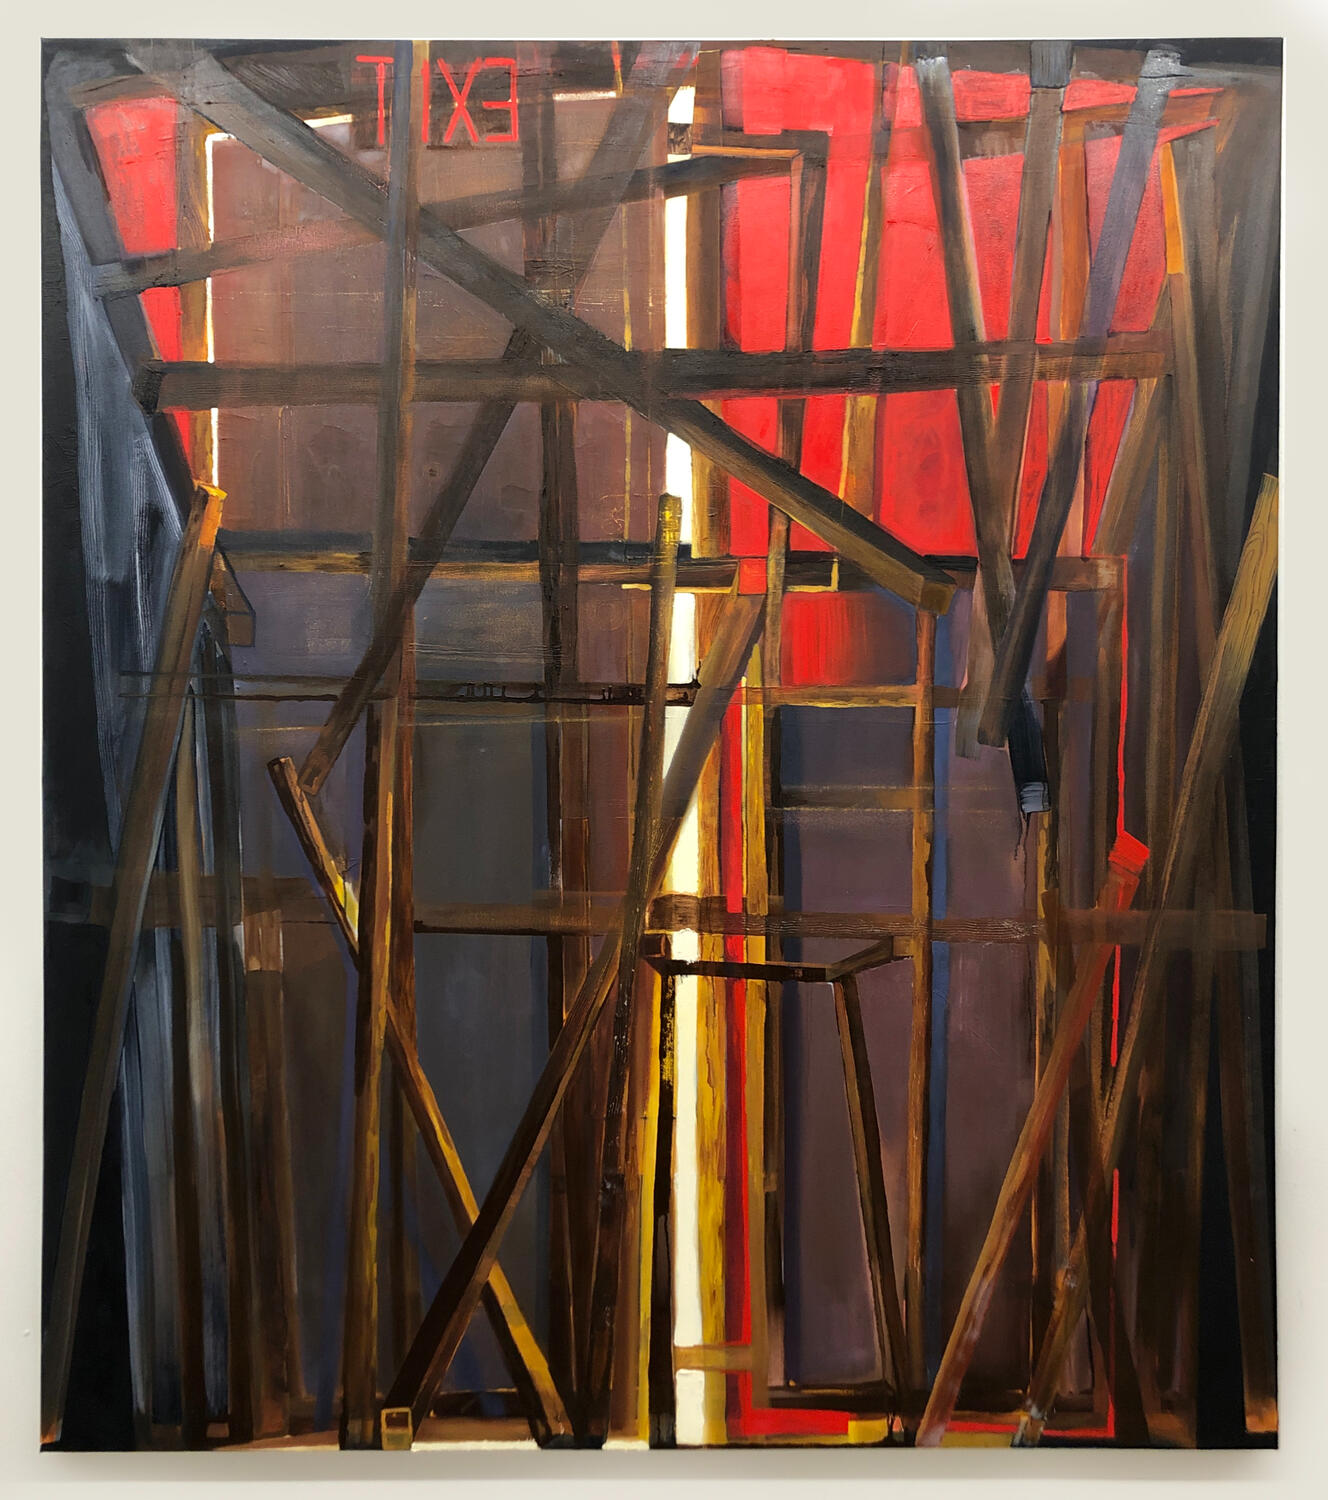 No Exit. 2023. Oil paint on canvas. 72 x 66 inches.